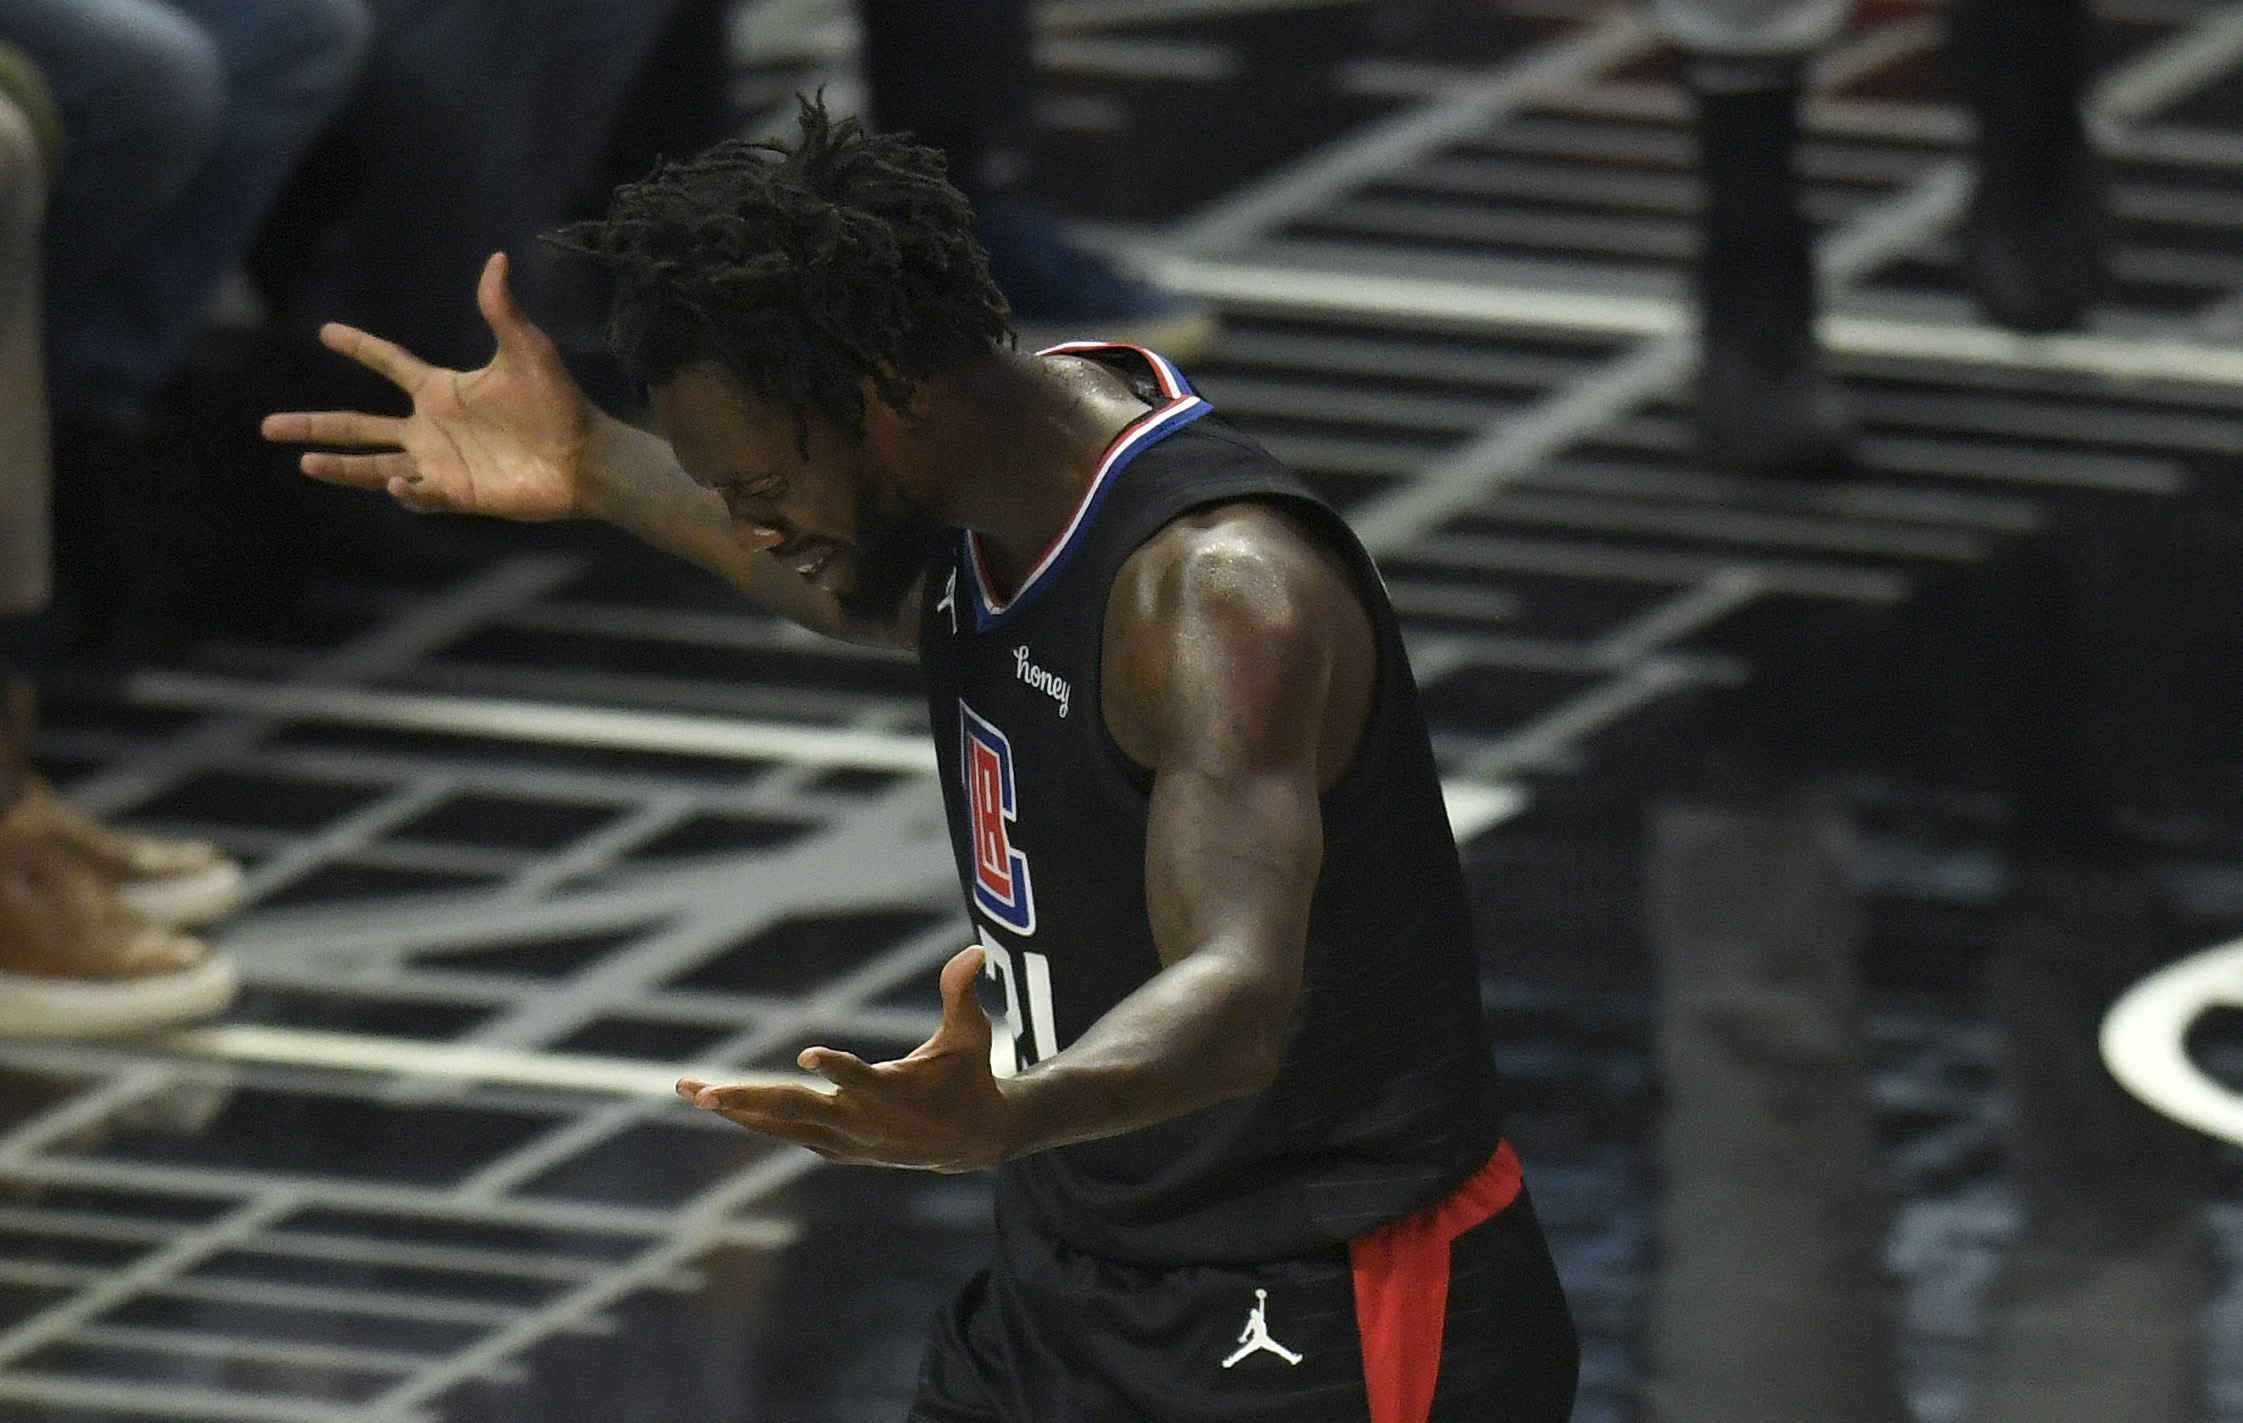 Patrick Beverley looks bummed after committing a foul.